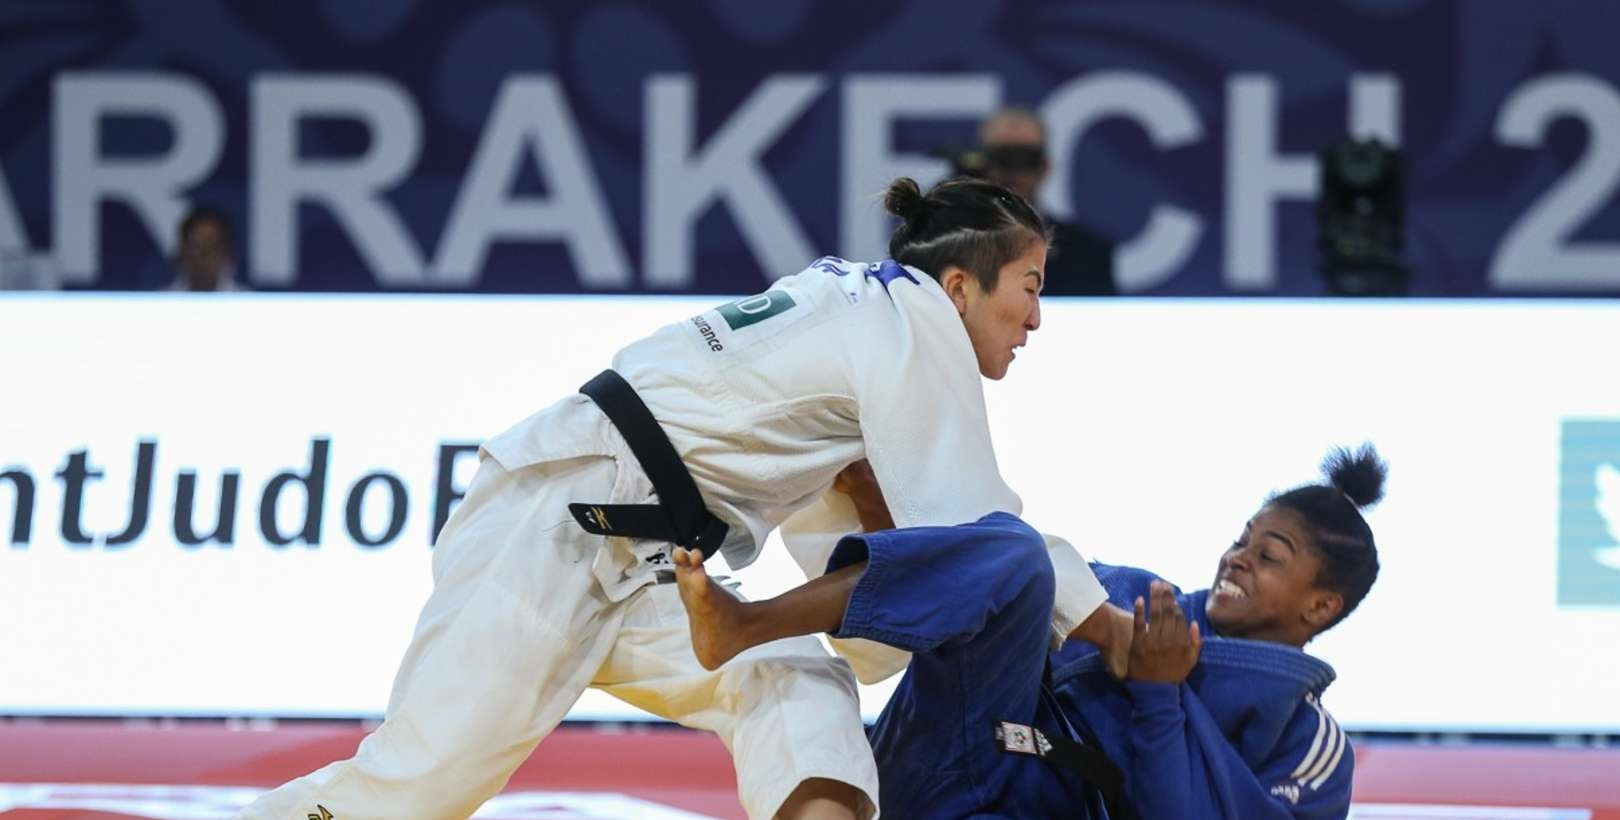 Home favourite Whitebooi strikes gold on opening day of African Senior Judo Championships